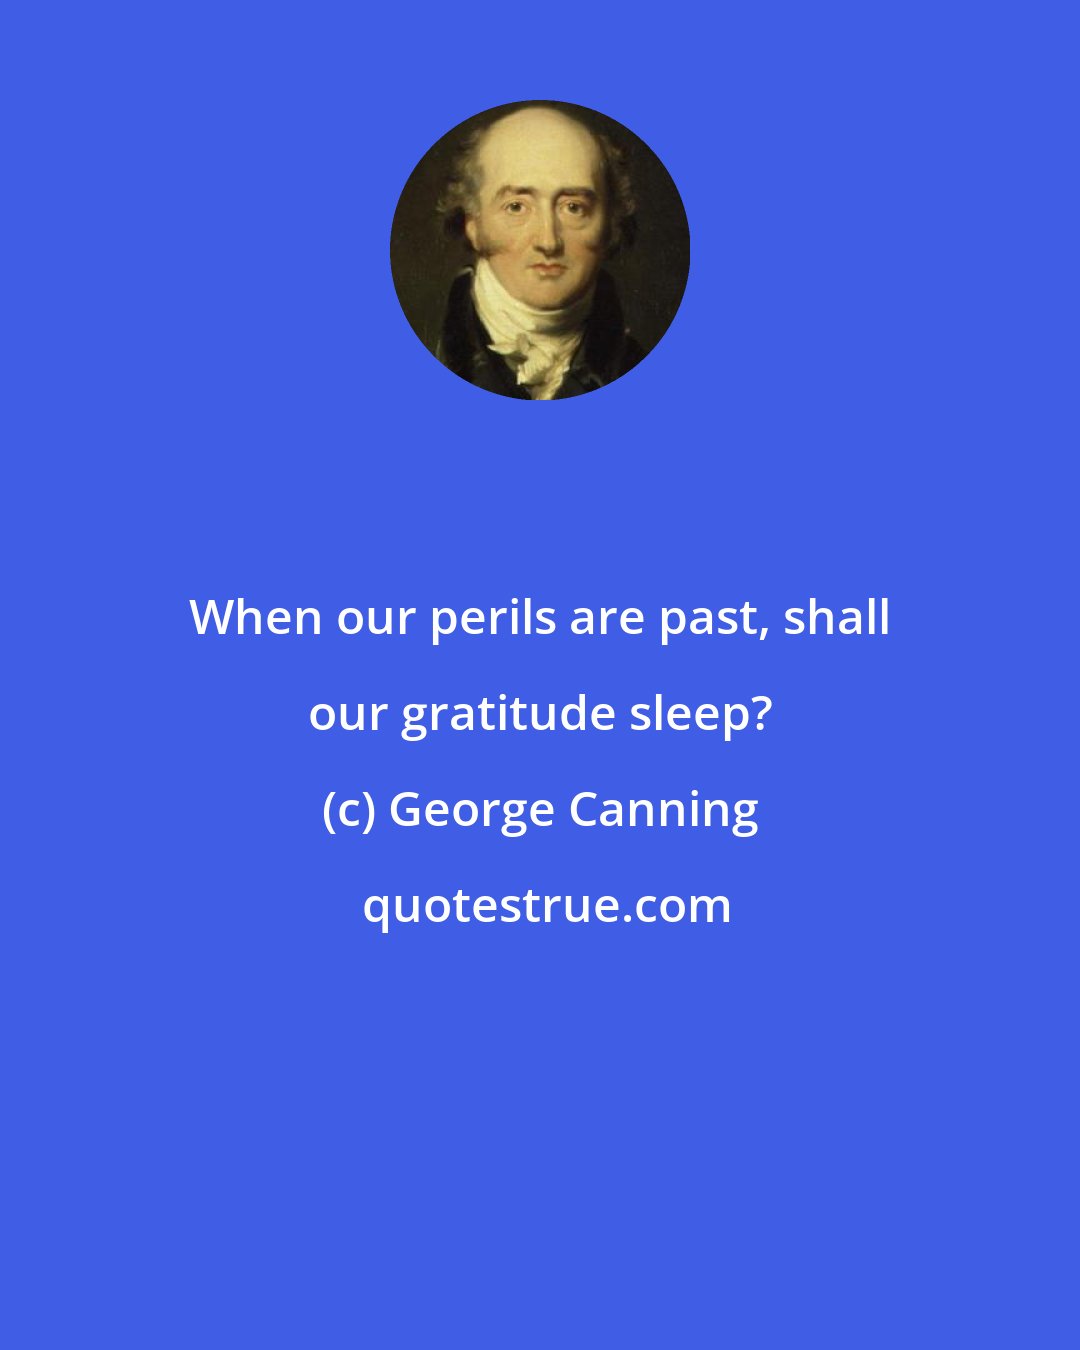 George Canning: When our perils are past, shall our gratitude sleep?